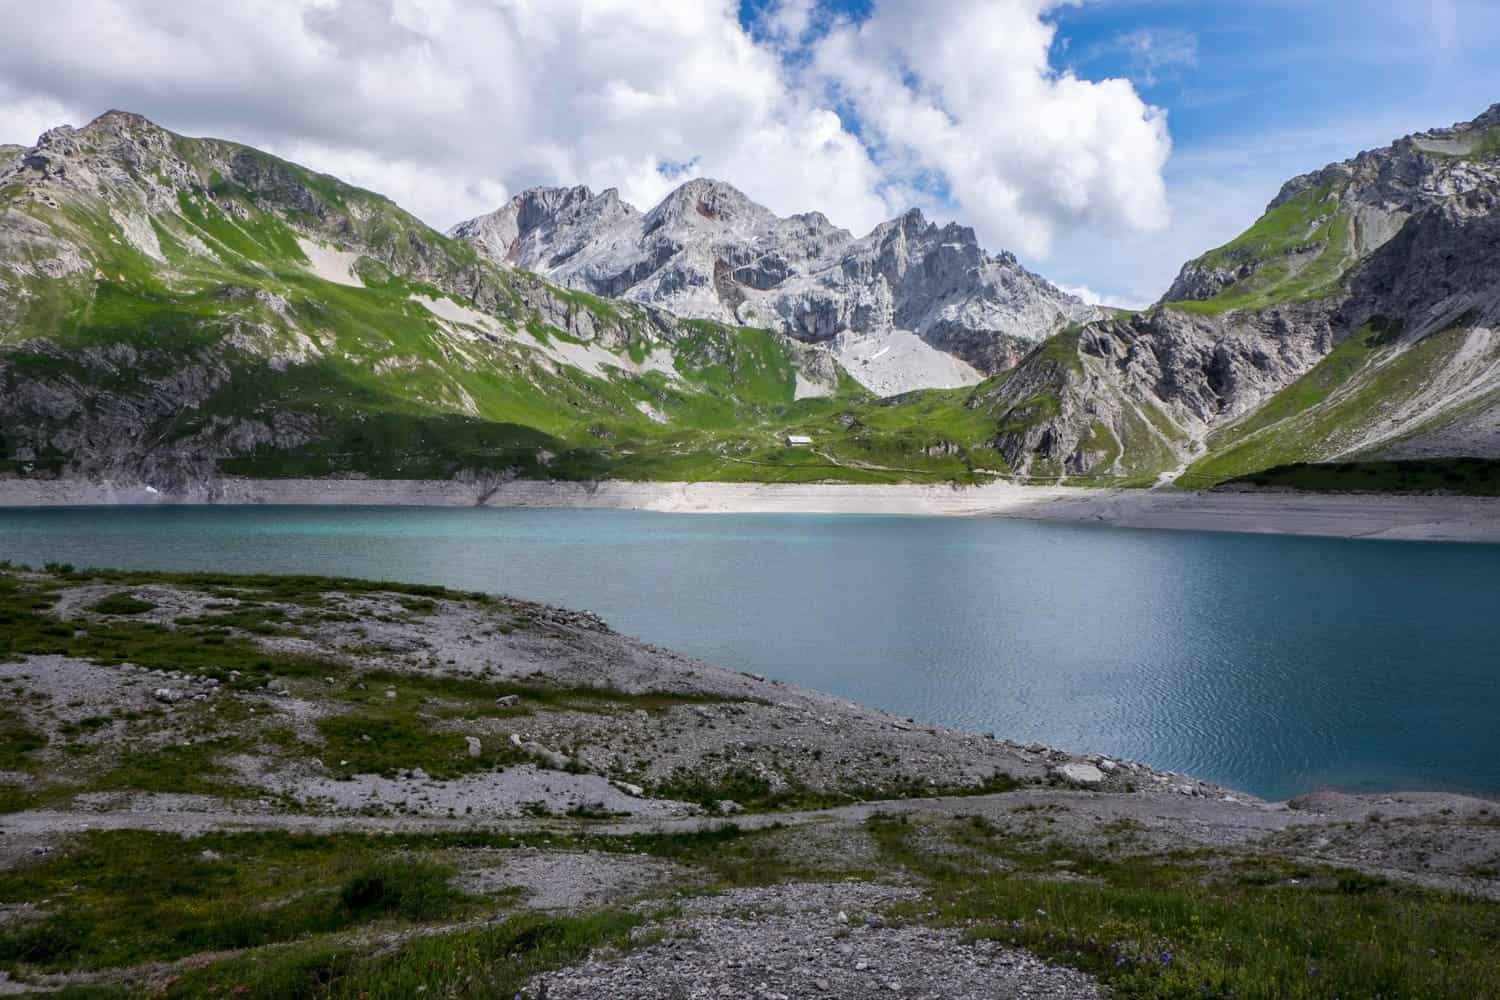 Lake Lunersee in Vorarlberg, Austria at the top of a mountain range